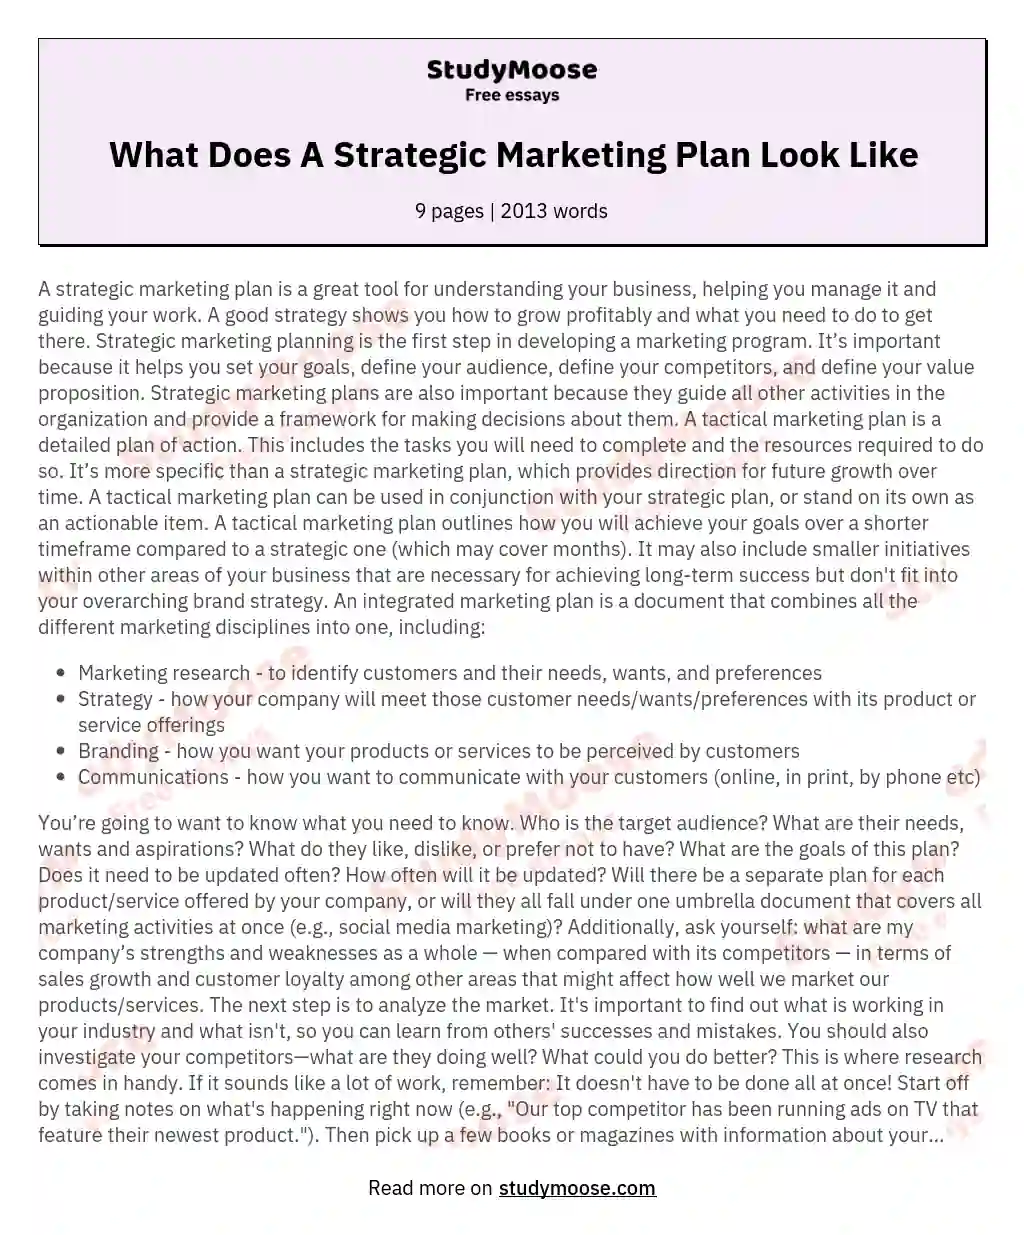 What Does A Strategic Marketing Plan Look Like essay